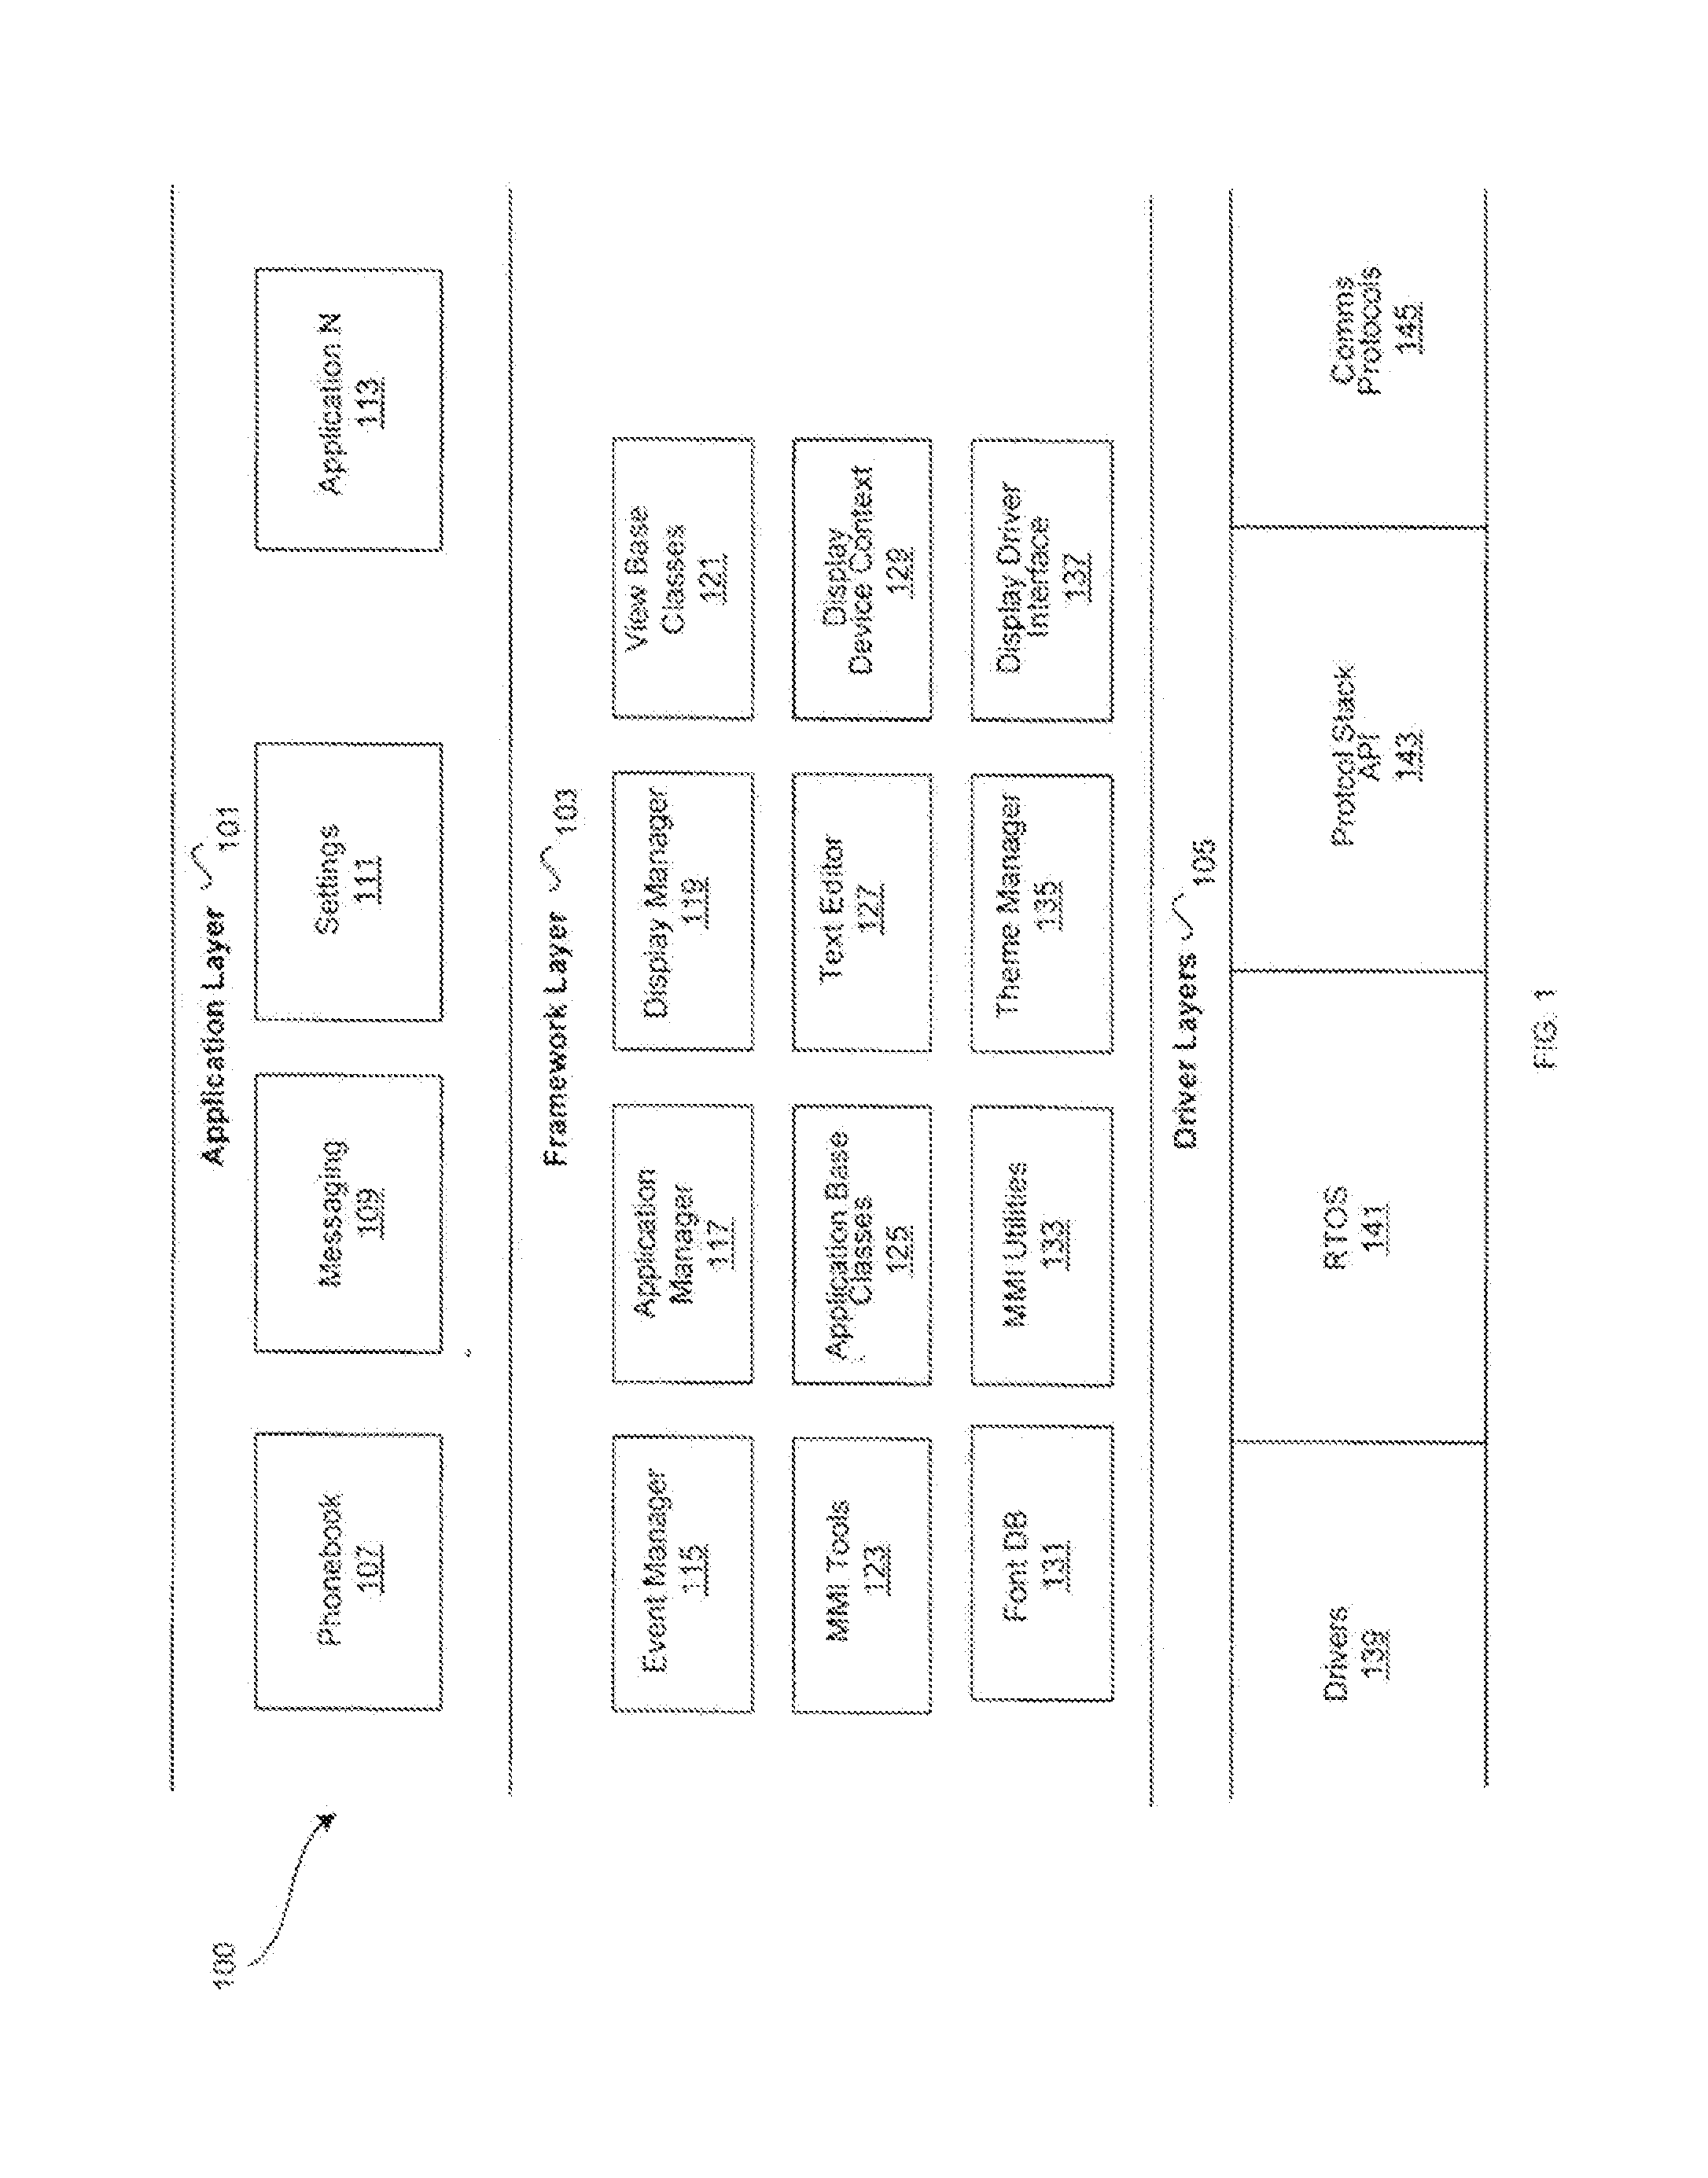 Method and System for an Application Framework for a Wireless Device